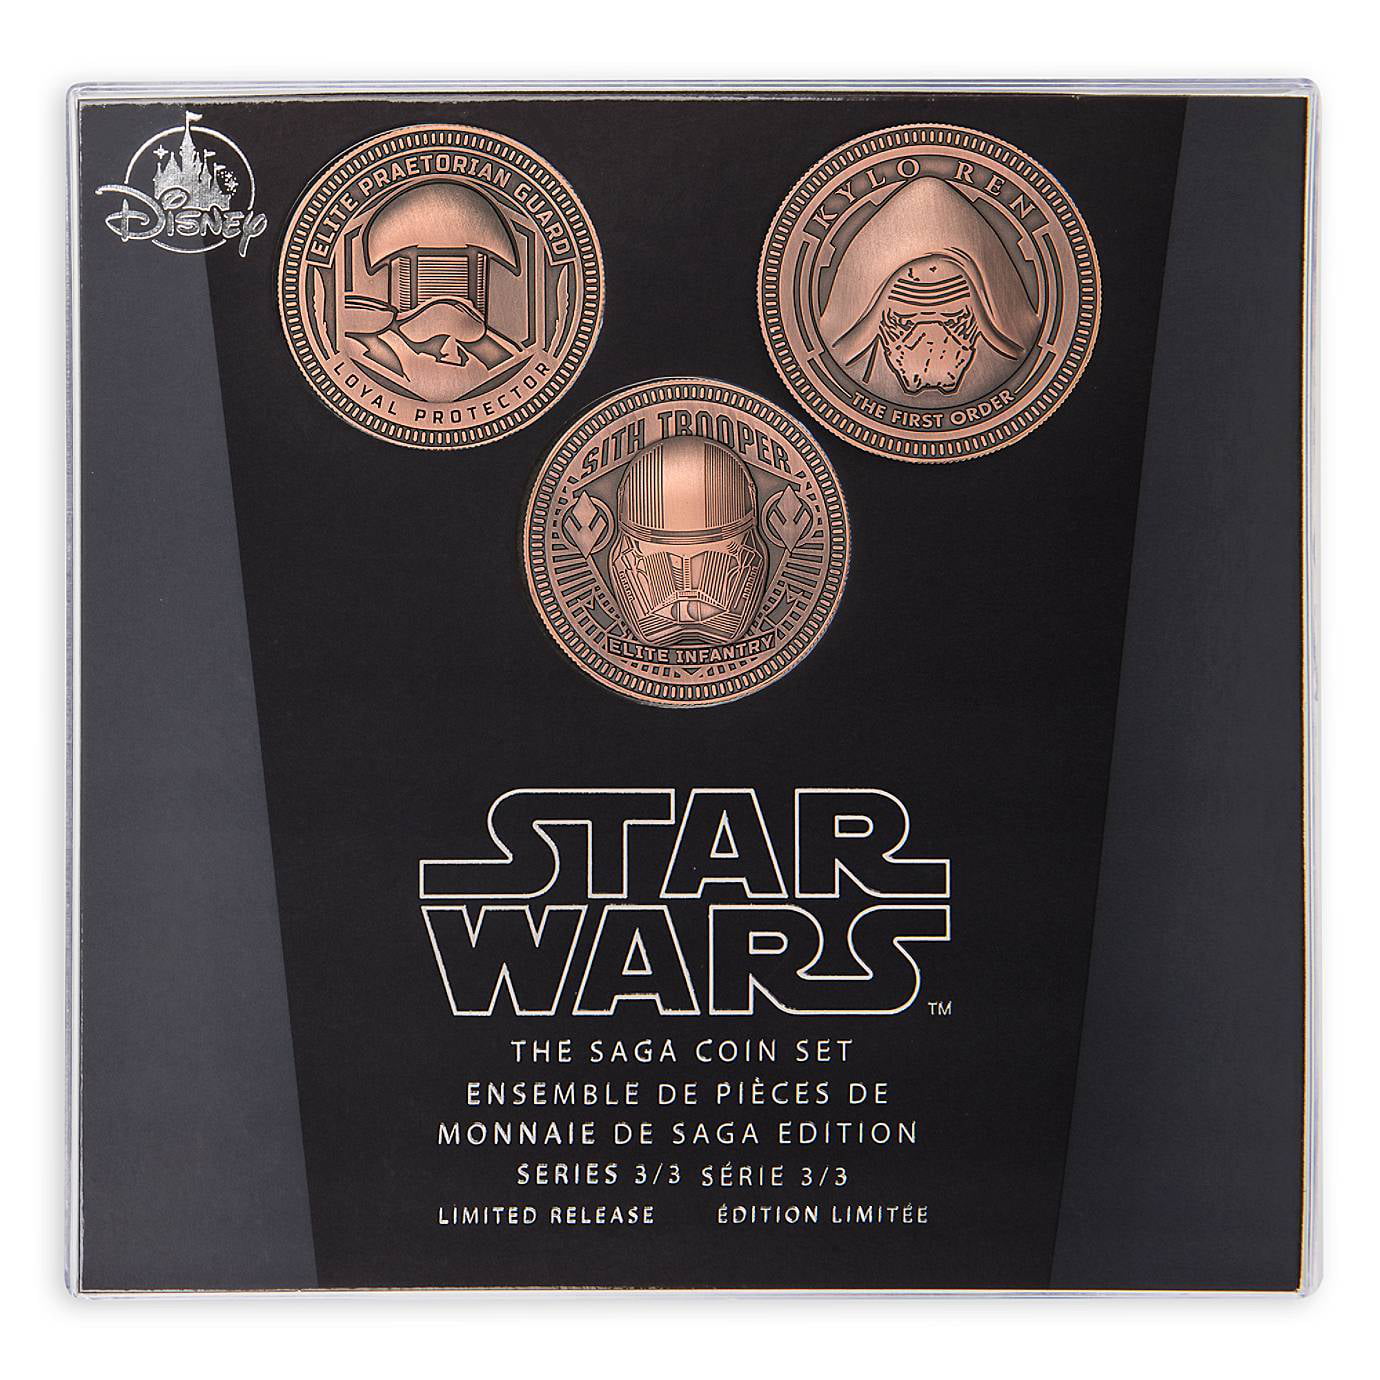 NEW Star Wars Limited Edition Stunning Collectable Coin Set 24 Coins Folder 